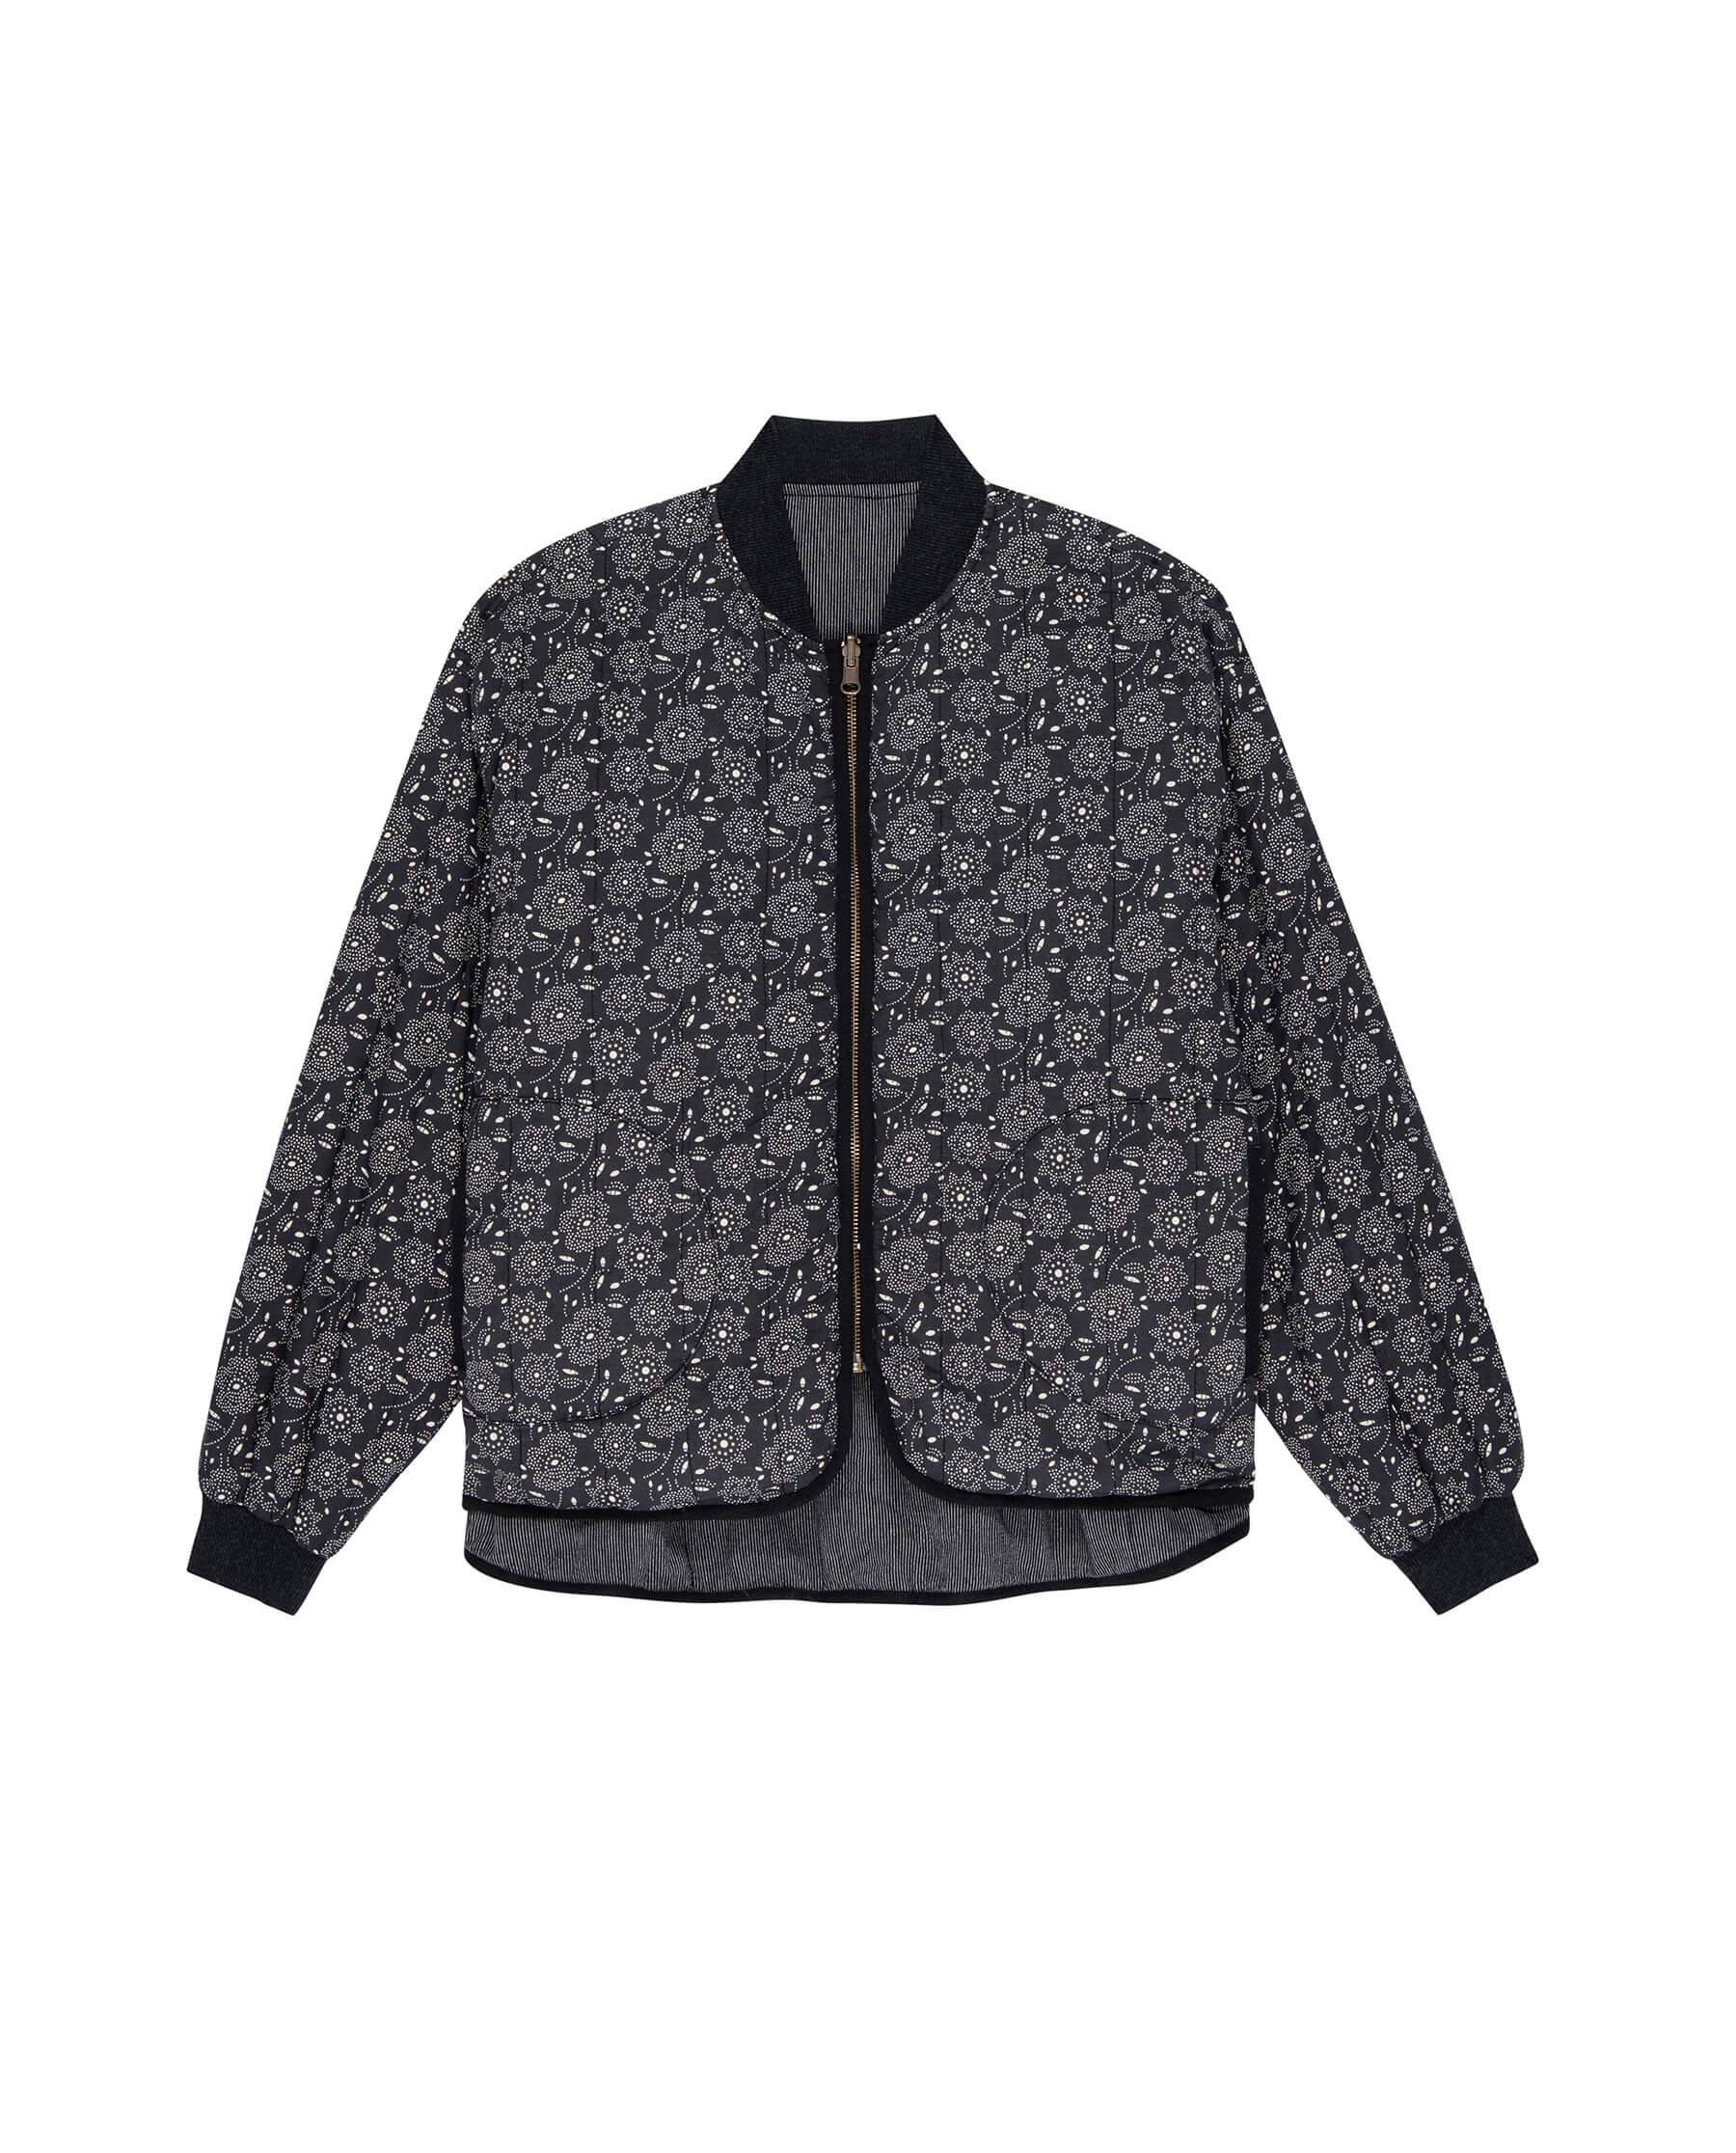 The Reversible Quilted Bomber. -- Black Token Floral